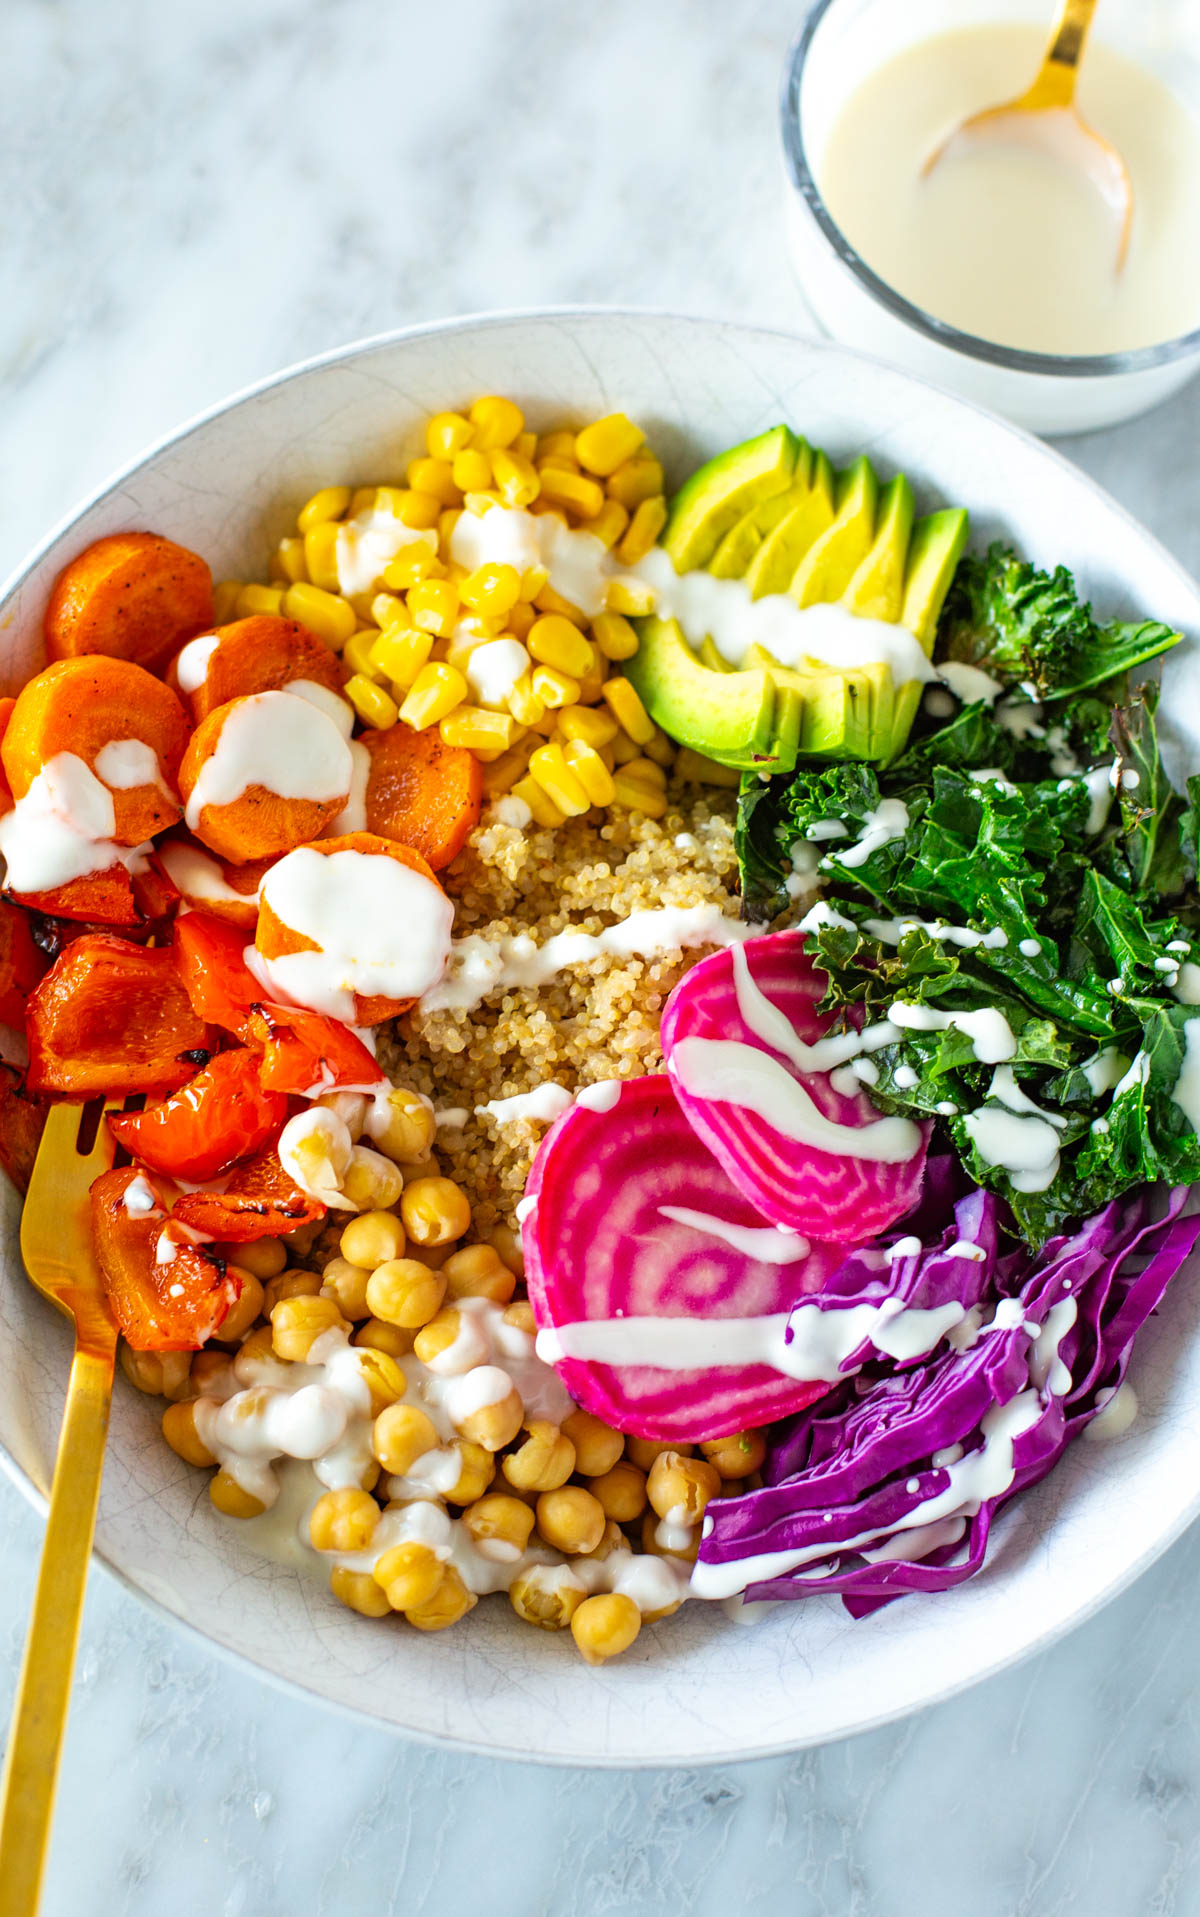 A rainbow veggie bowl with garlic dressing drizzled on top.